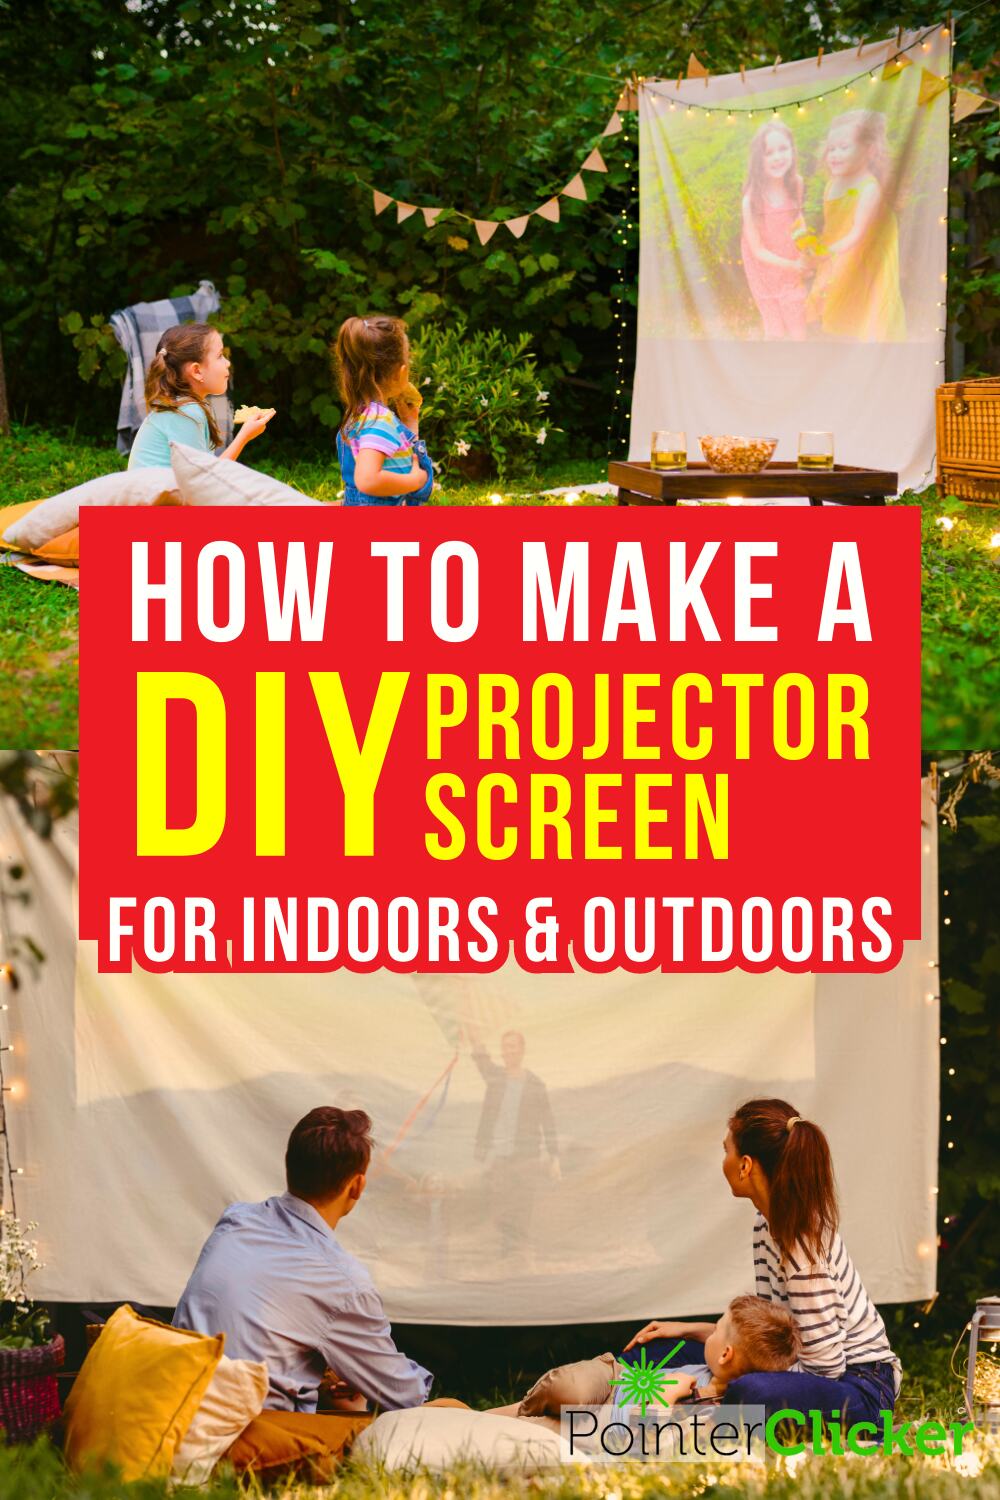 there are 2 girls watching movie on a projector screen in the first image. In the second image, there is a family watching movie on a projector screen. The words say 'how to make a diy projector screen for indoors and outdoors'